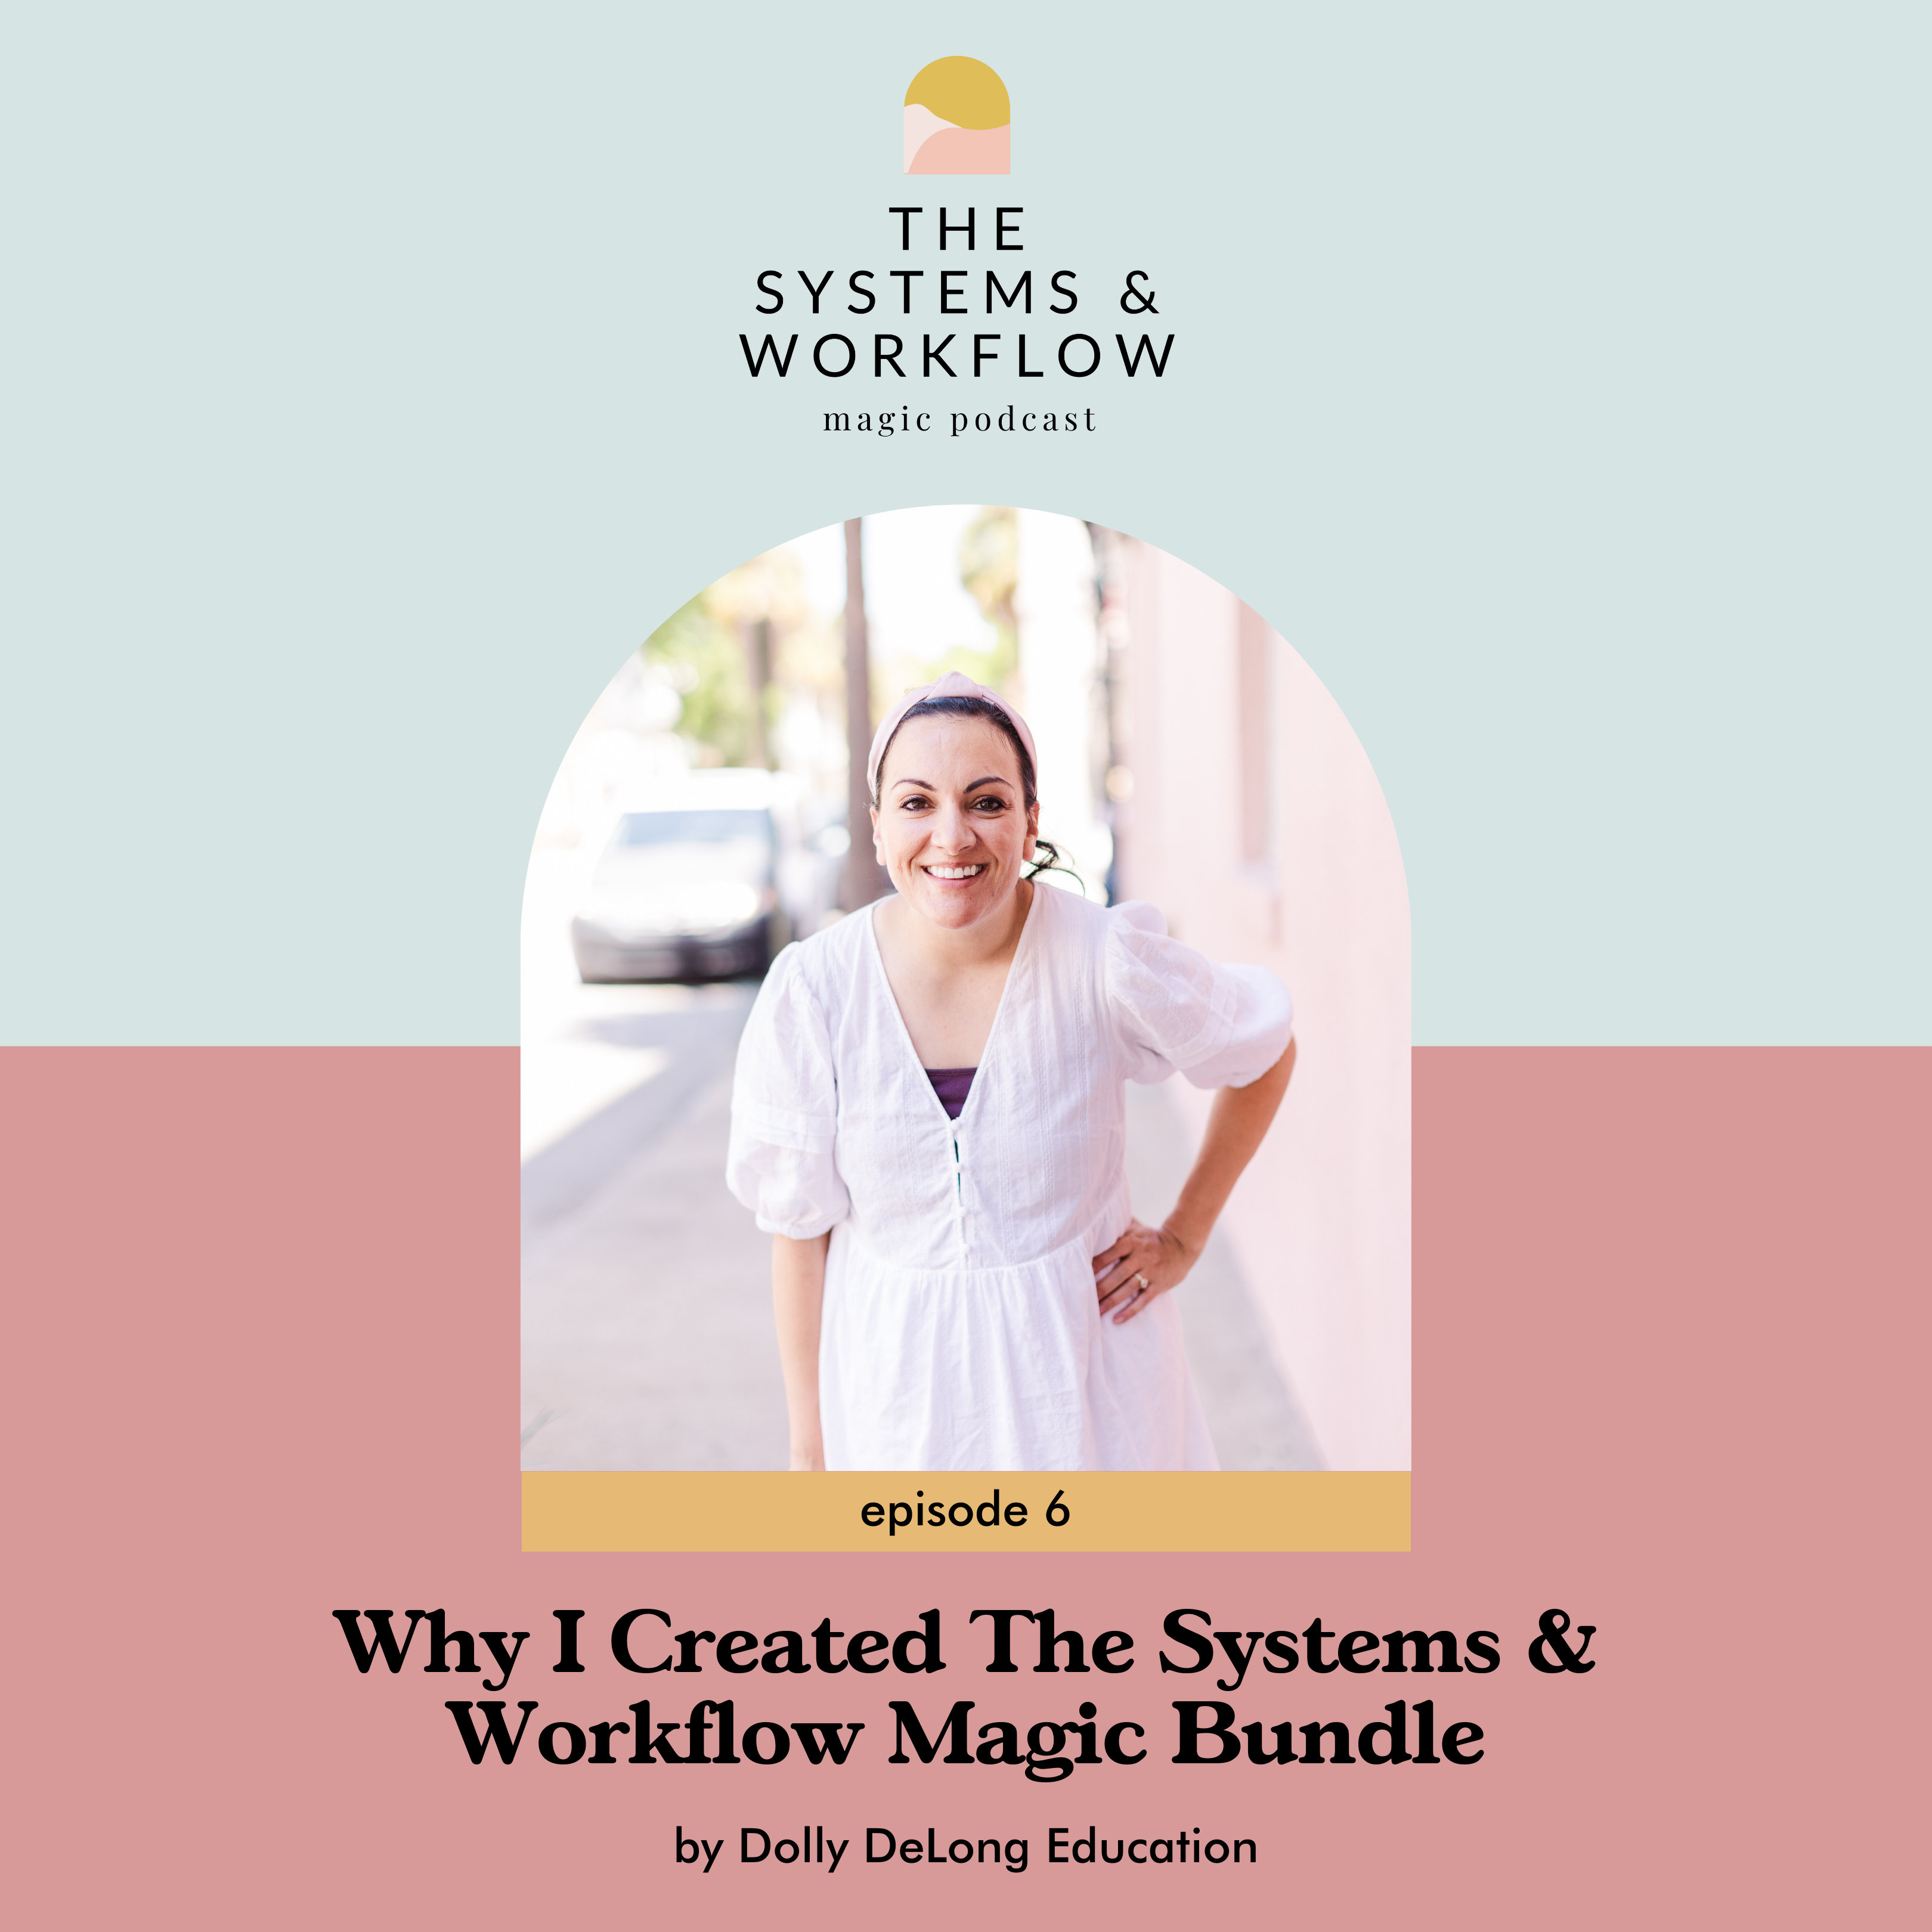 Why I created the systems and workflow magic bundle